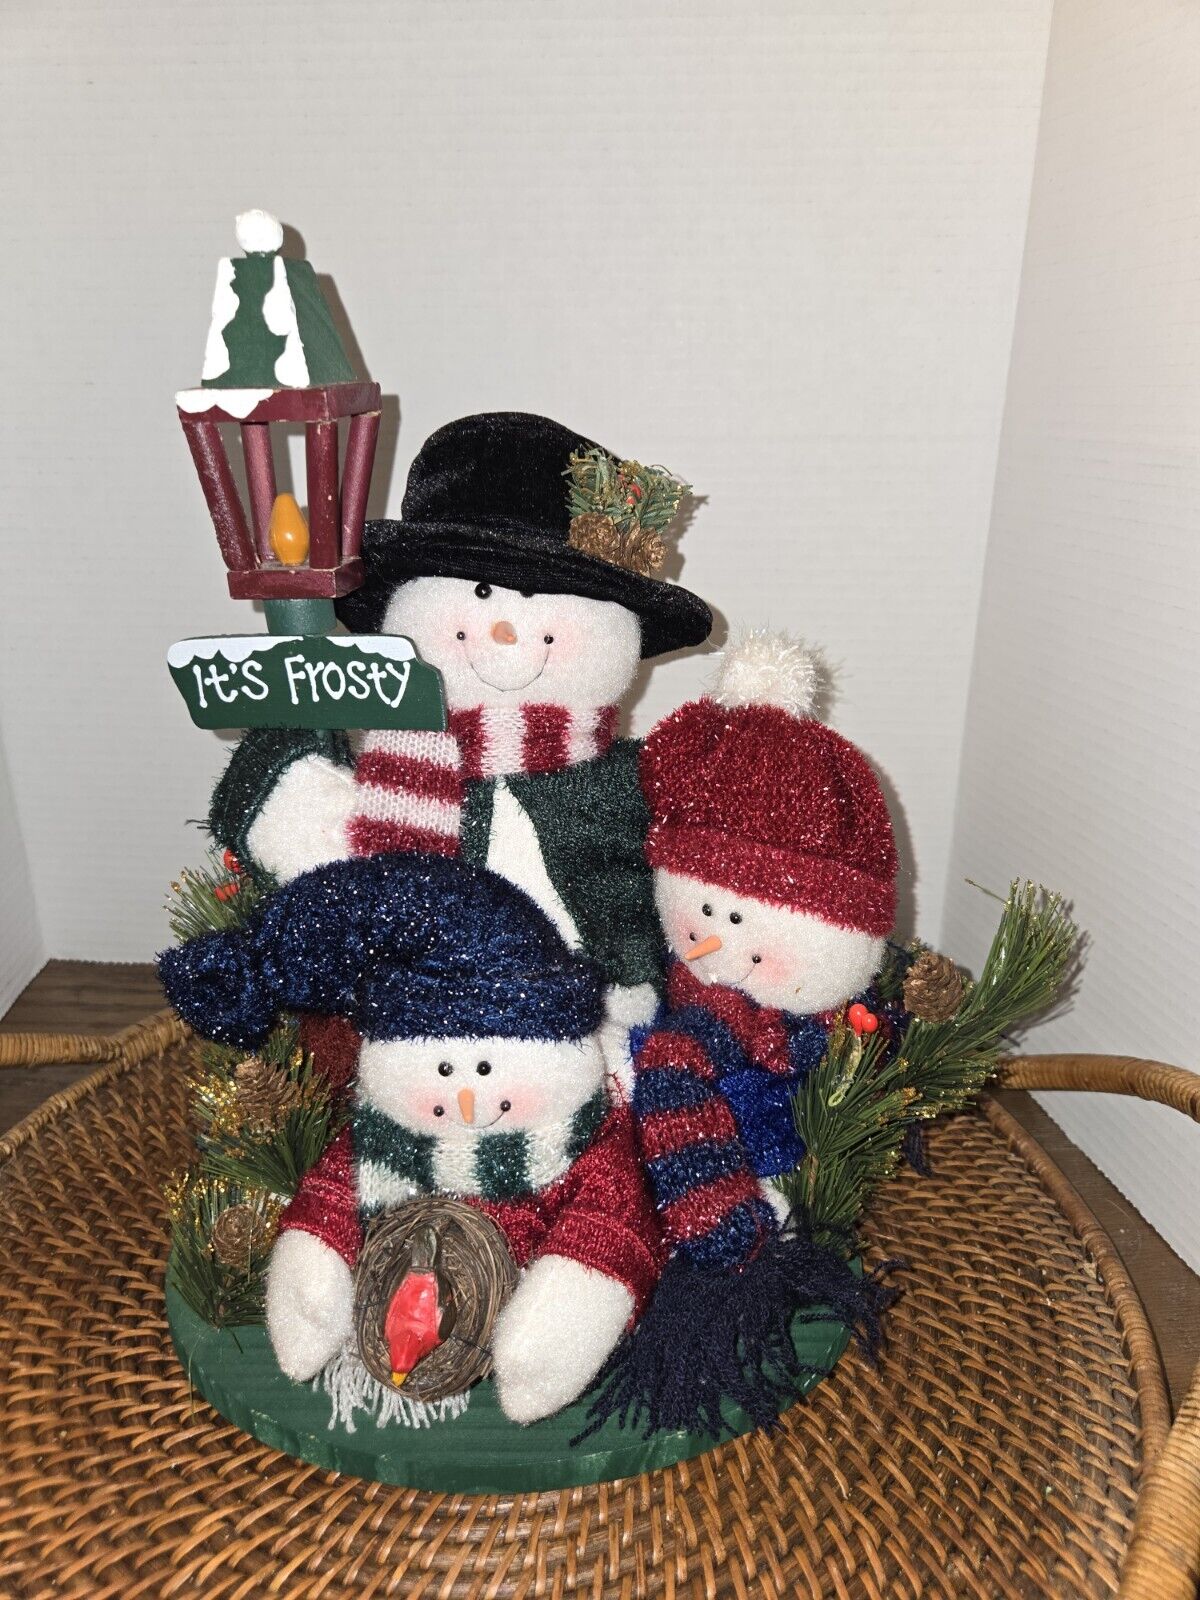 Plush Snowman Family Setting Its Frosty Wooden Display Table Christmas Decor 